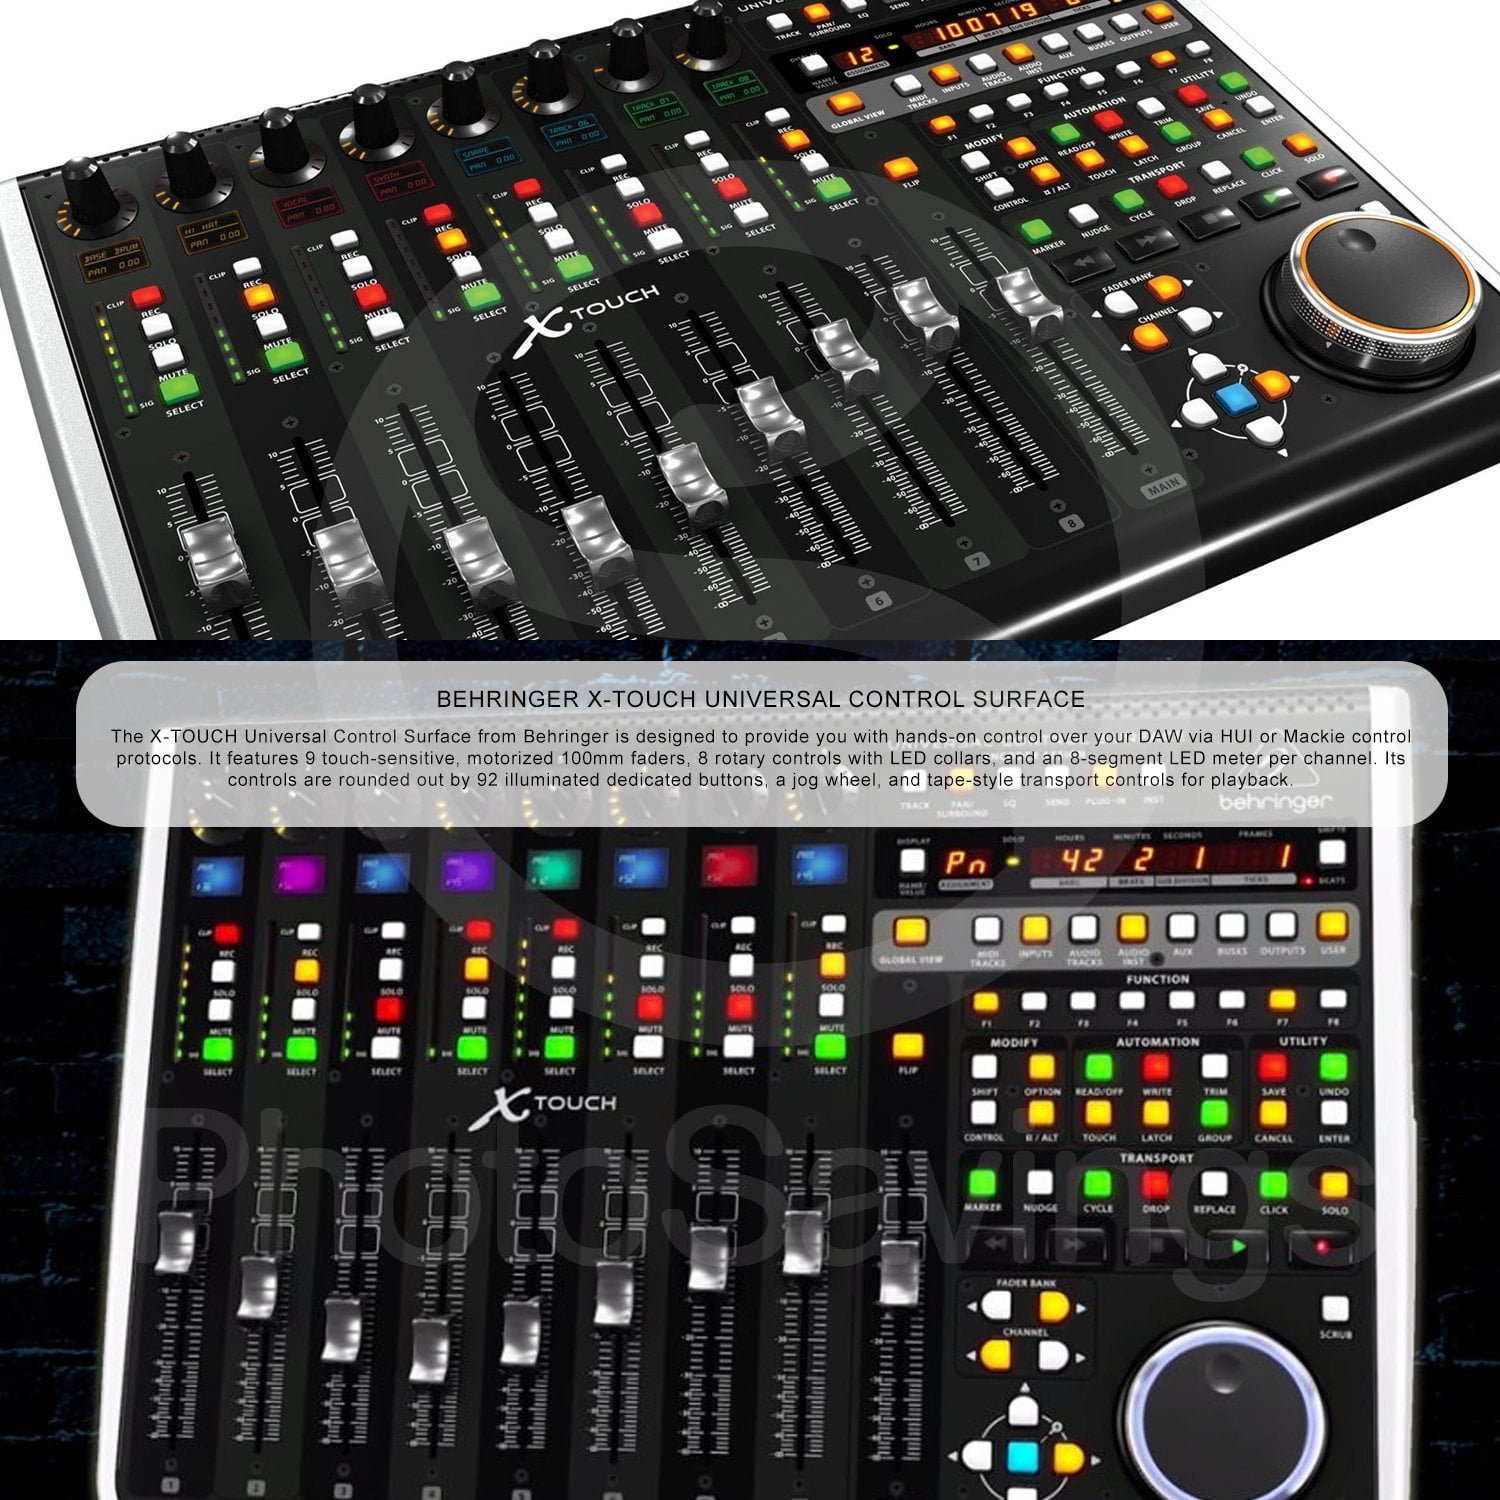 Musicians　and　Behringer　Guide　for　Home　X-TOUCH　Dummies　Surface　Bundle　Universal　Recording　Control　for　Accessory　w/　Much　More